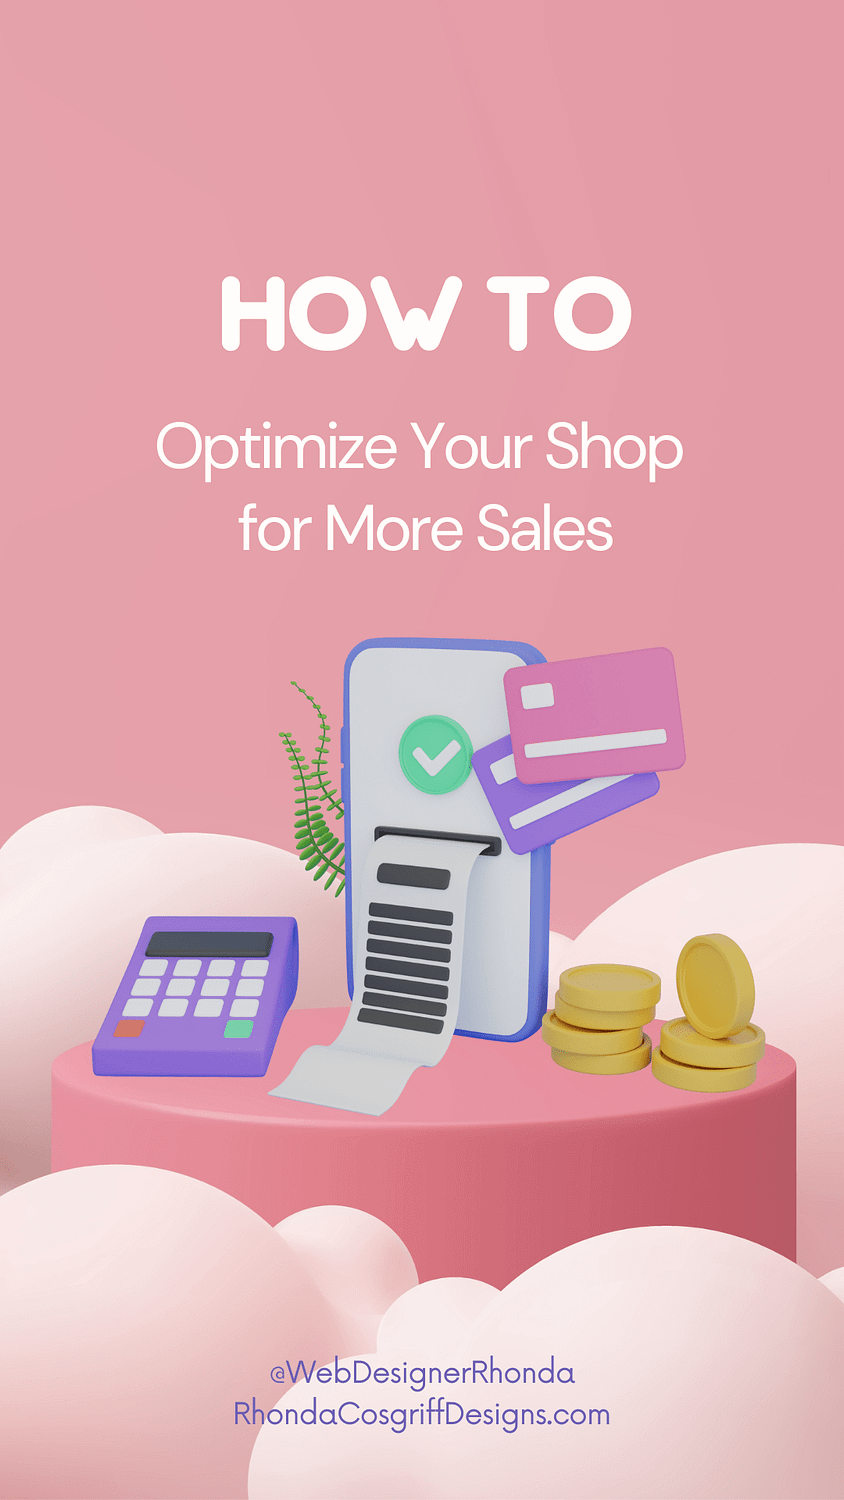 How to Optimize Your Shop for More Sales